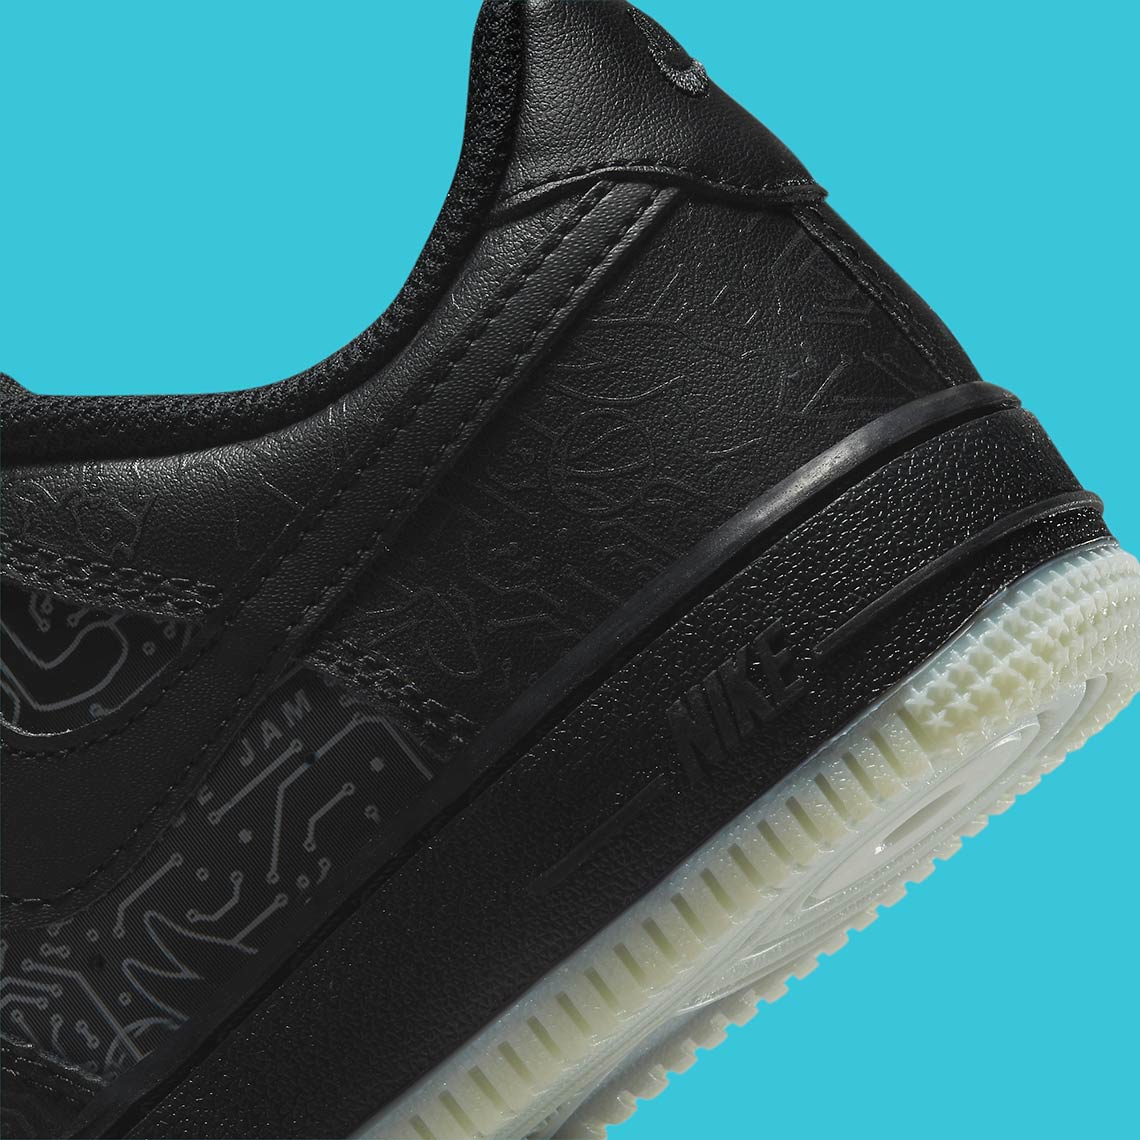 Space Jam Nike Air Force 1 Black GS PS TD Release Info